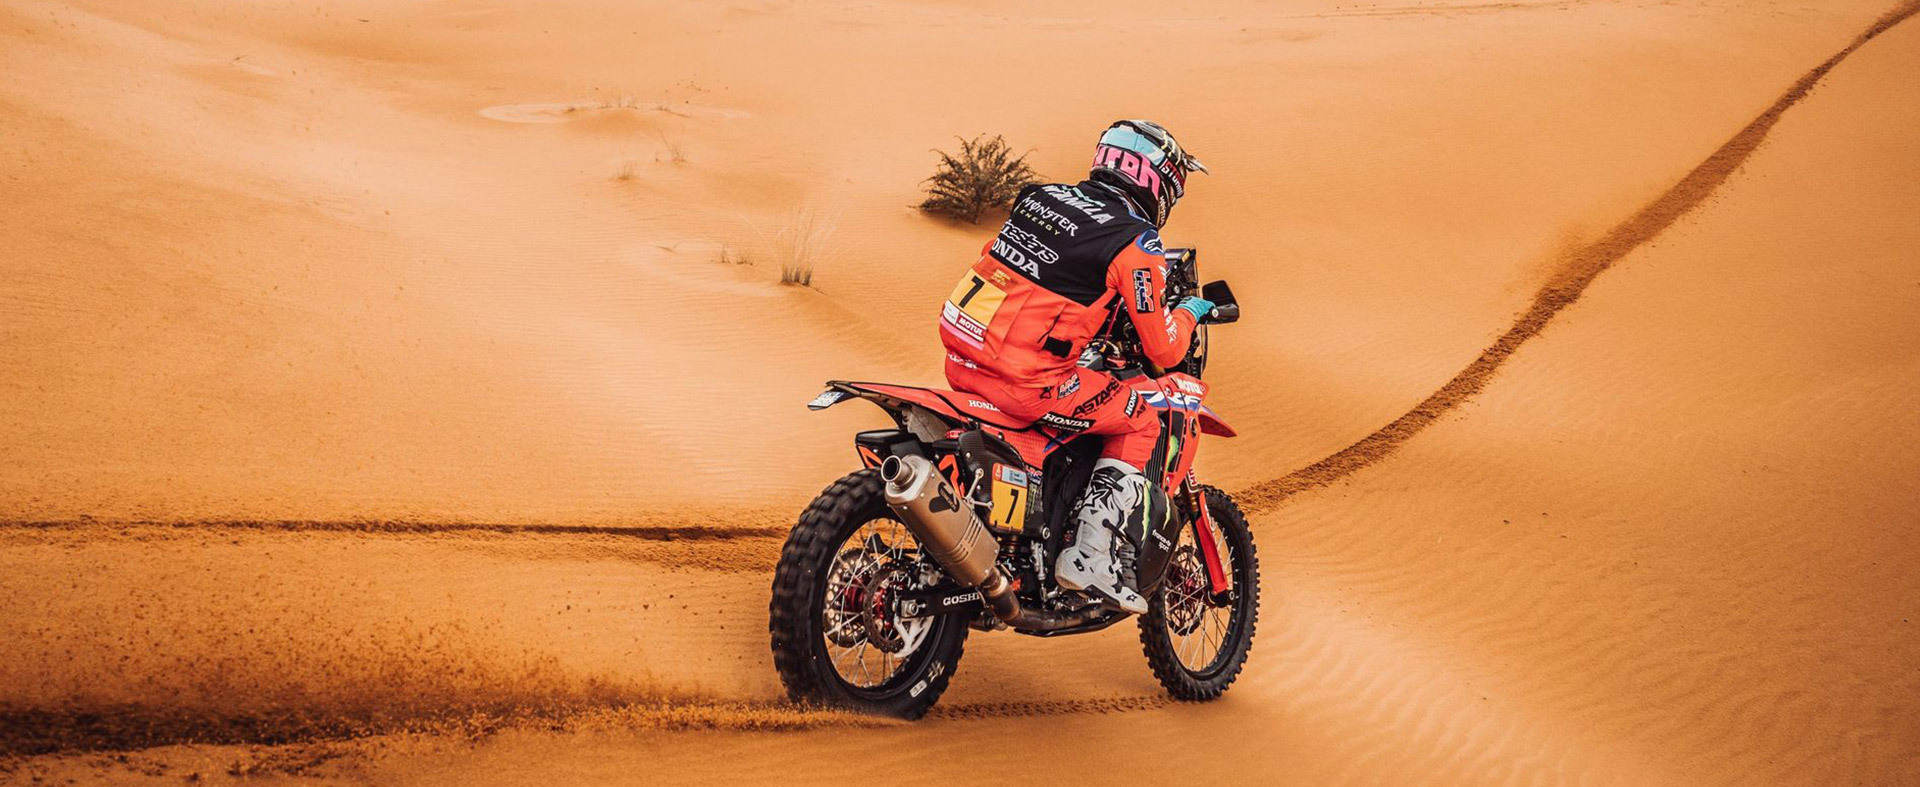 First stage win for the Monster Energy Honda Team at the 2022 Dakar